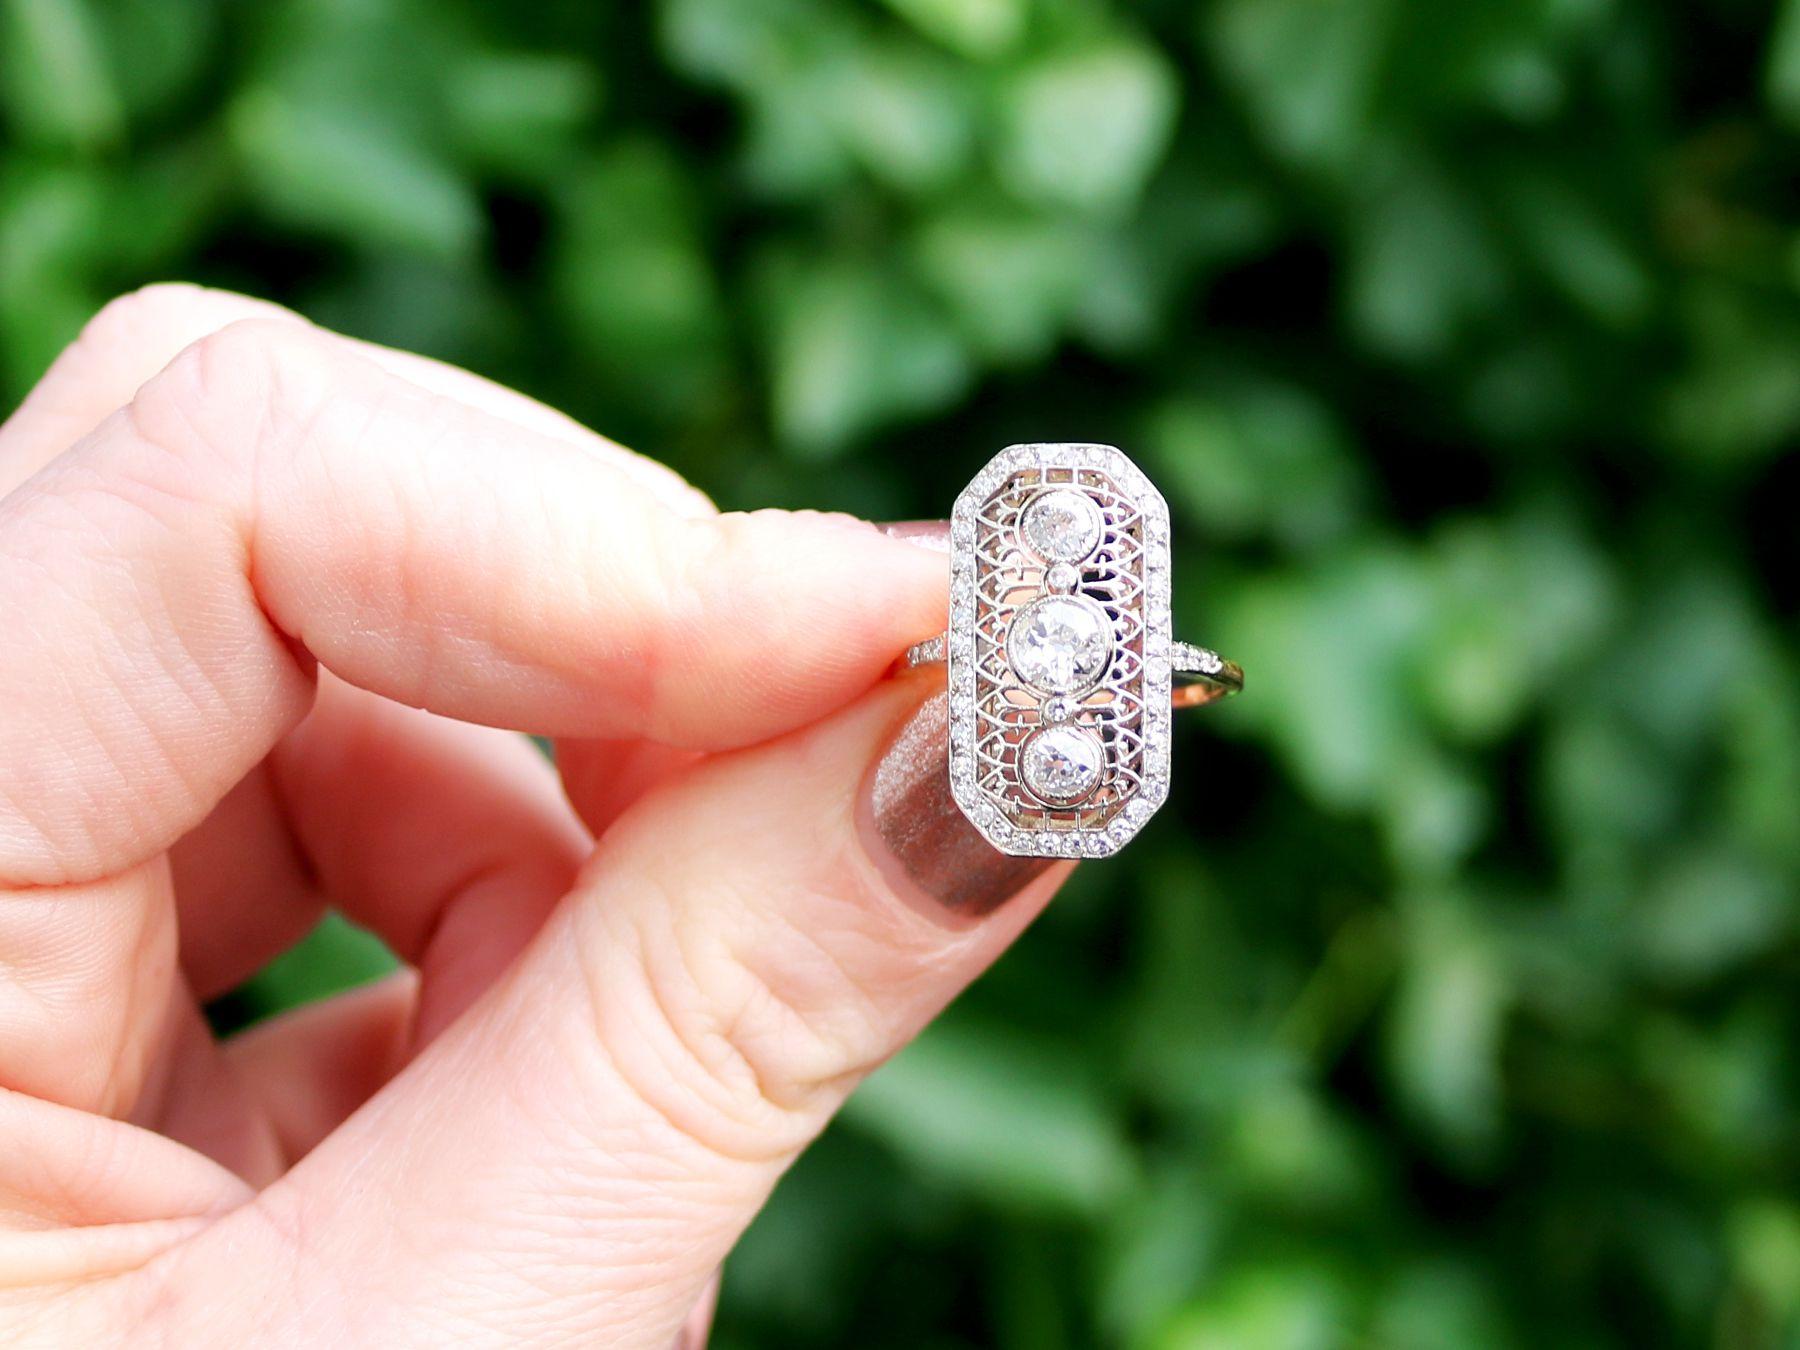 A stunning antique 1920s 1.26 carat diamond and 18 karat yellow gold, platinum set dress ring; part of our diverse antique jewelry and estate jewelry collections.

This stunning, fine and impressive antique 1920s diamond ring has been crafted in 18k